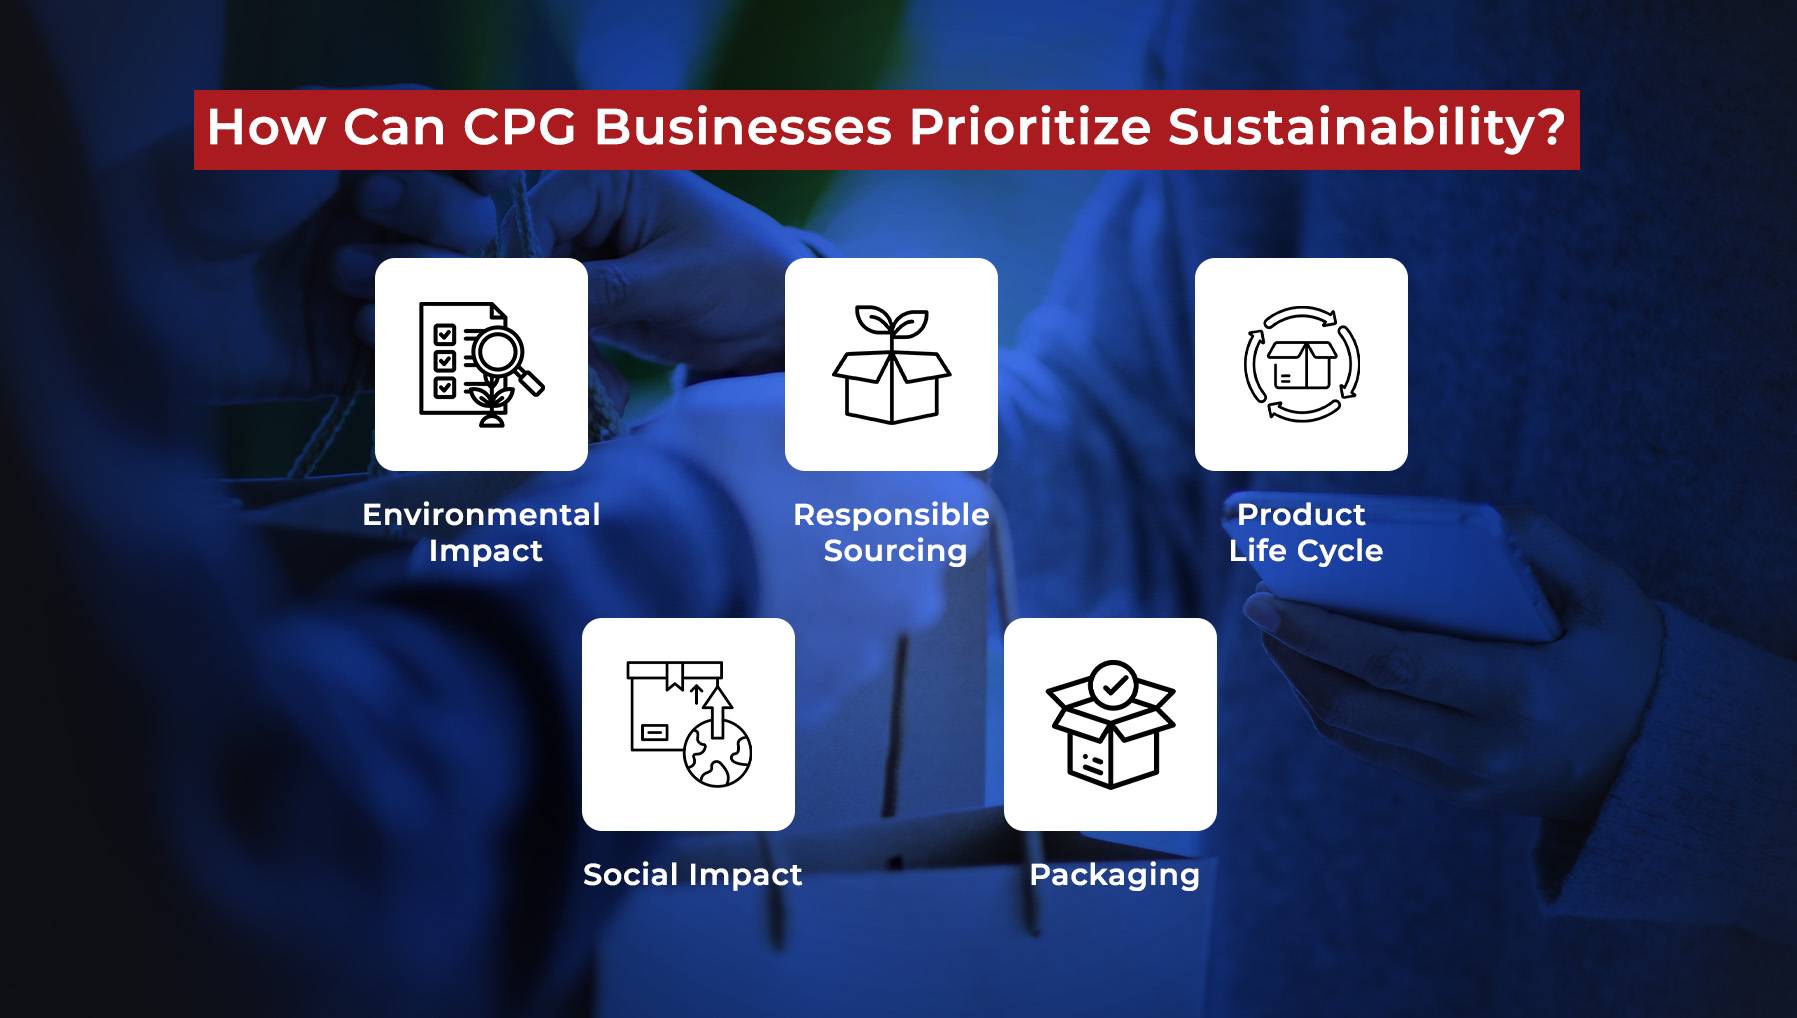 Why CPG Business Prioritize Sustainability?